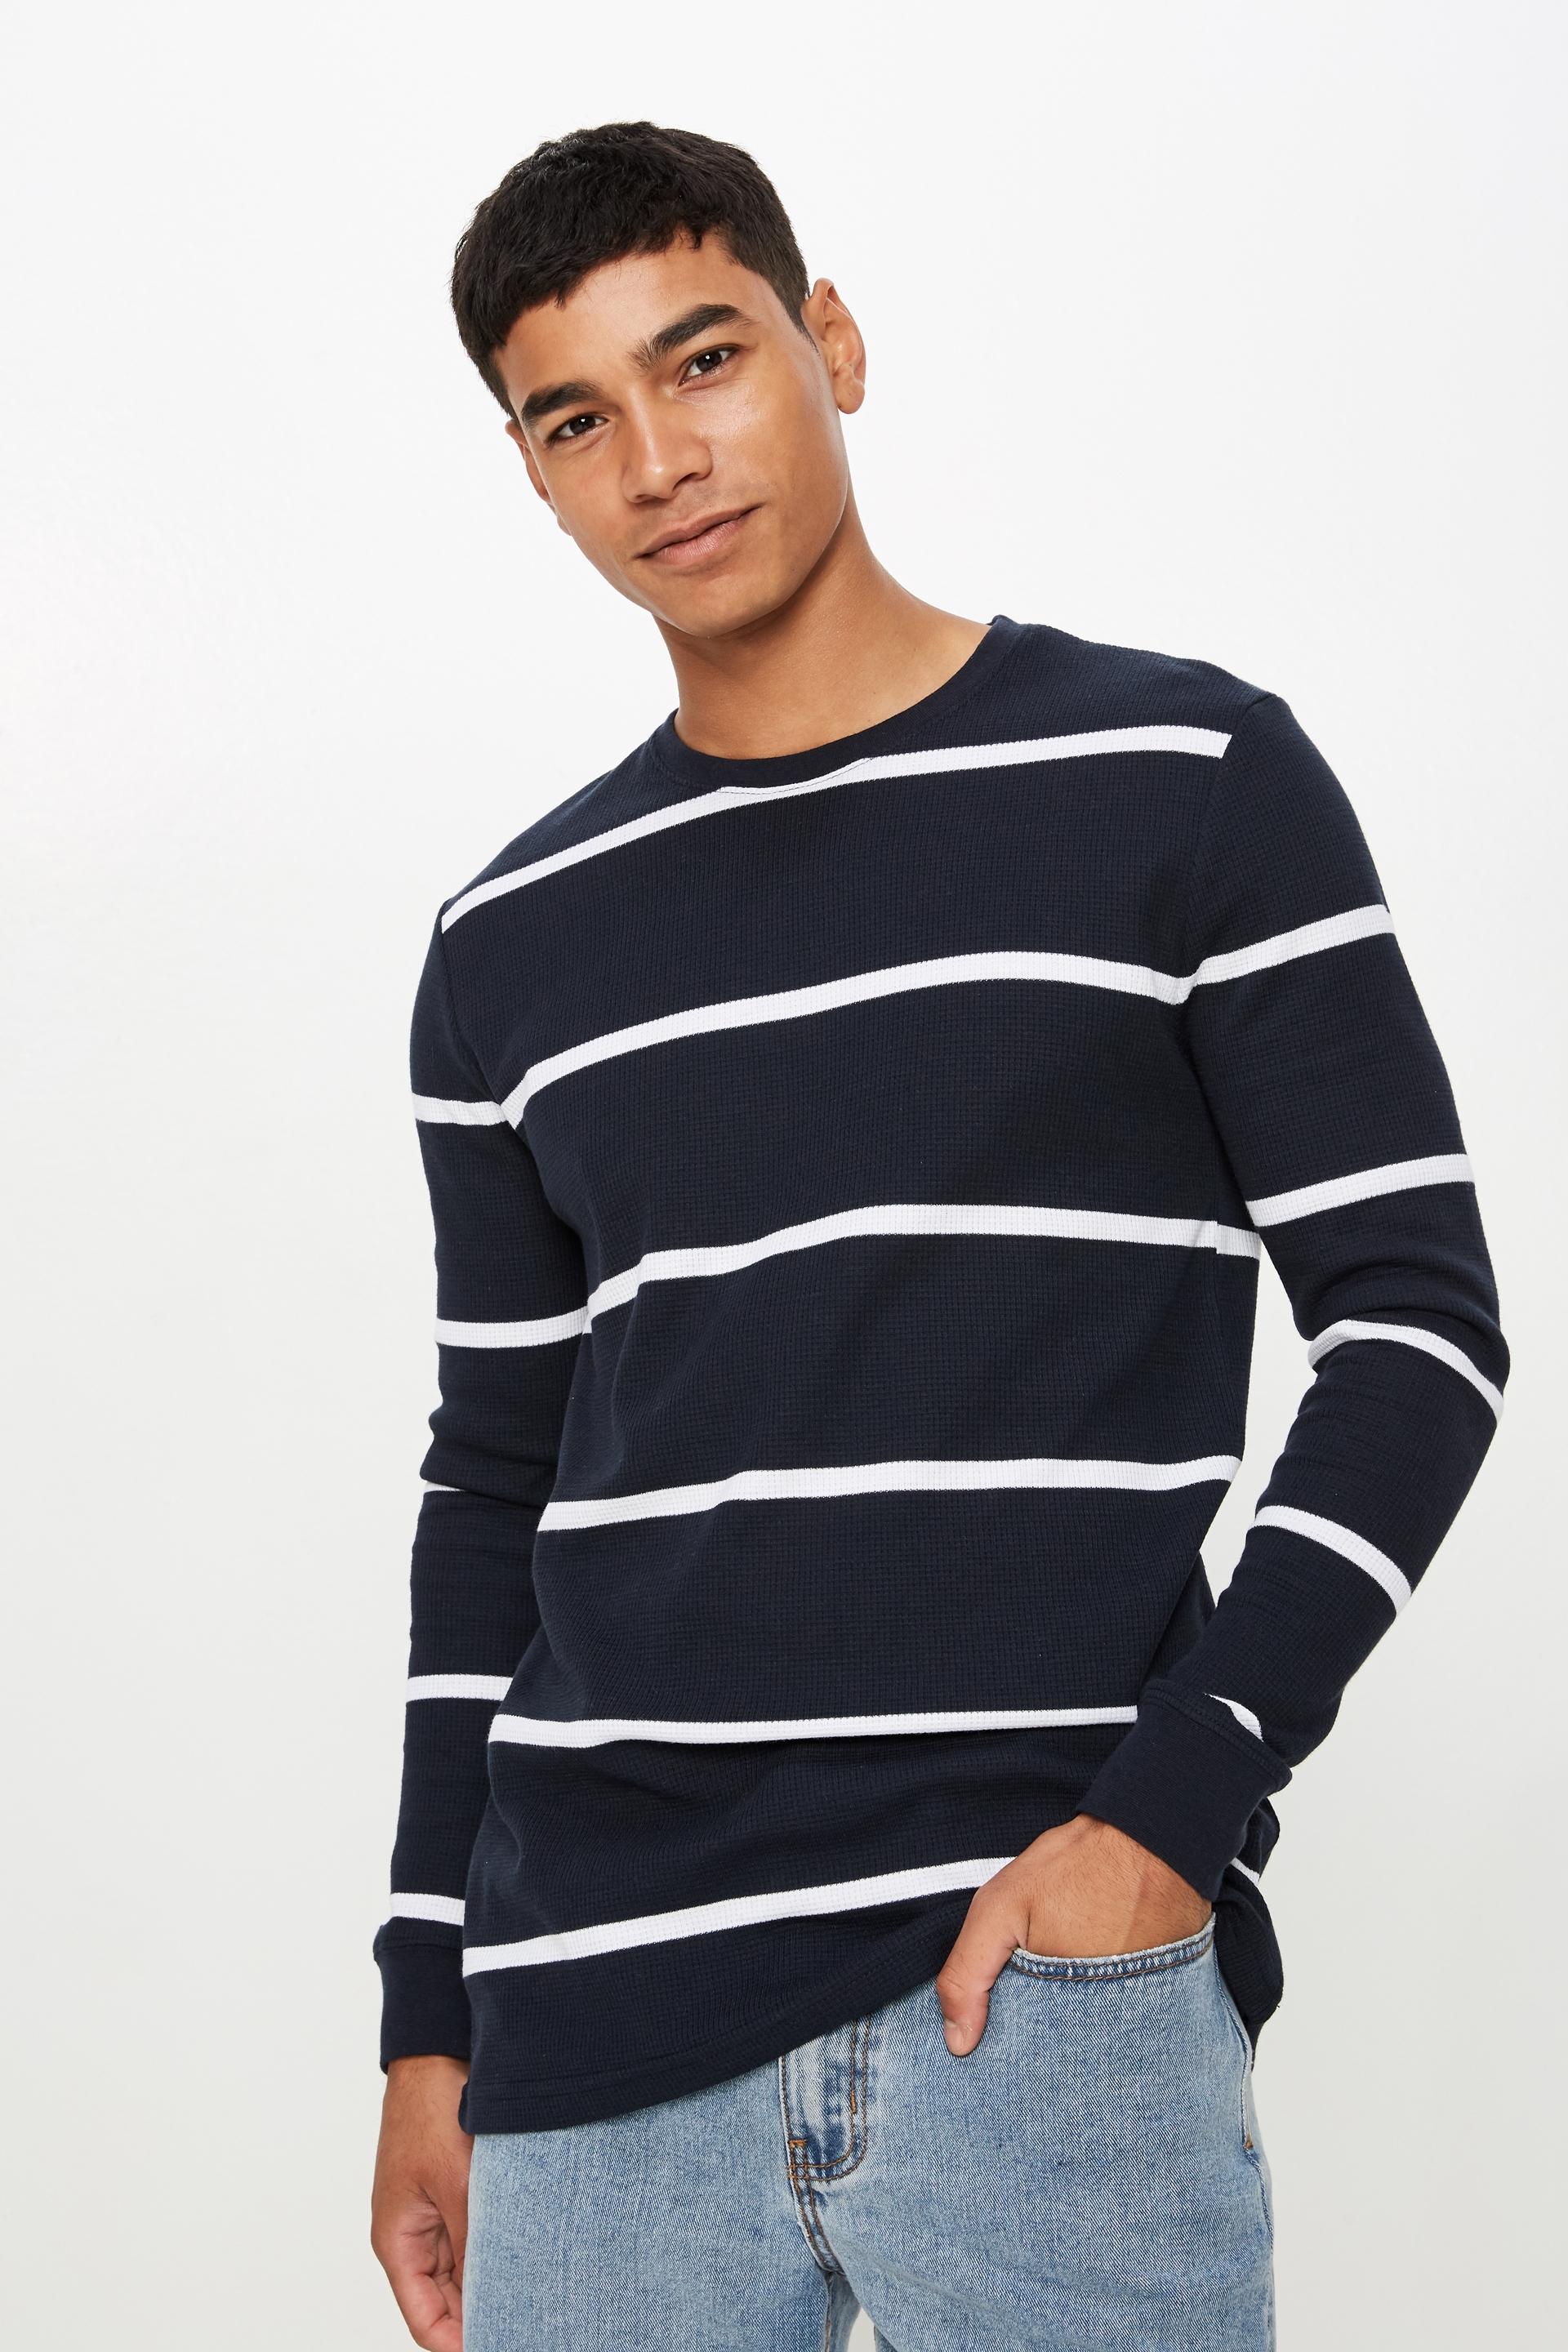 Waffle long sleeve tee - ink navy/white spaced black stripe Cotton On T ...